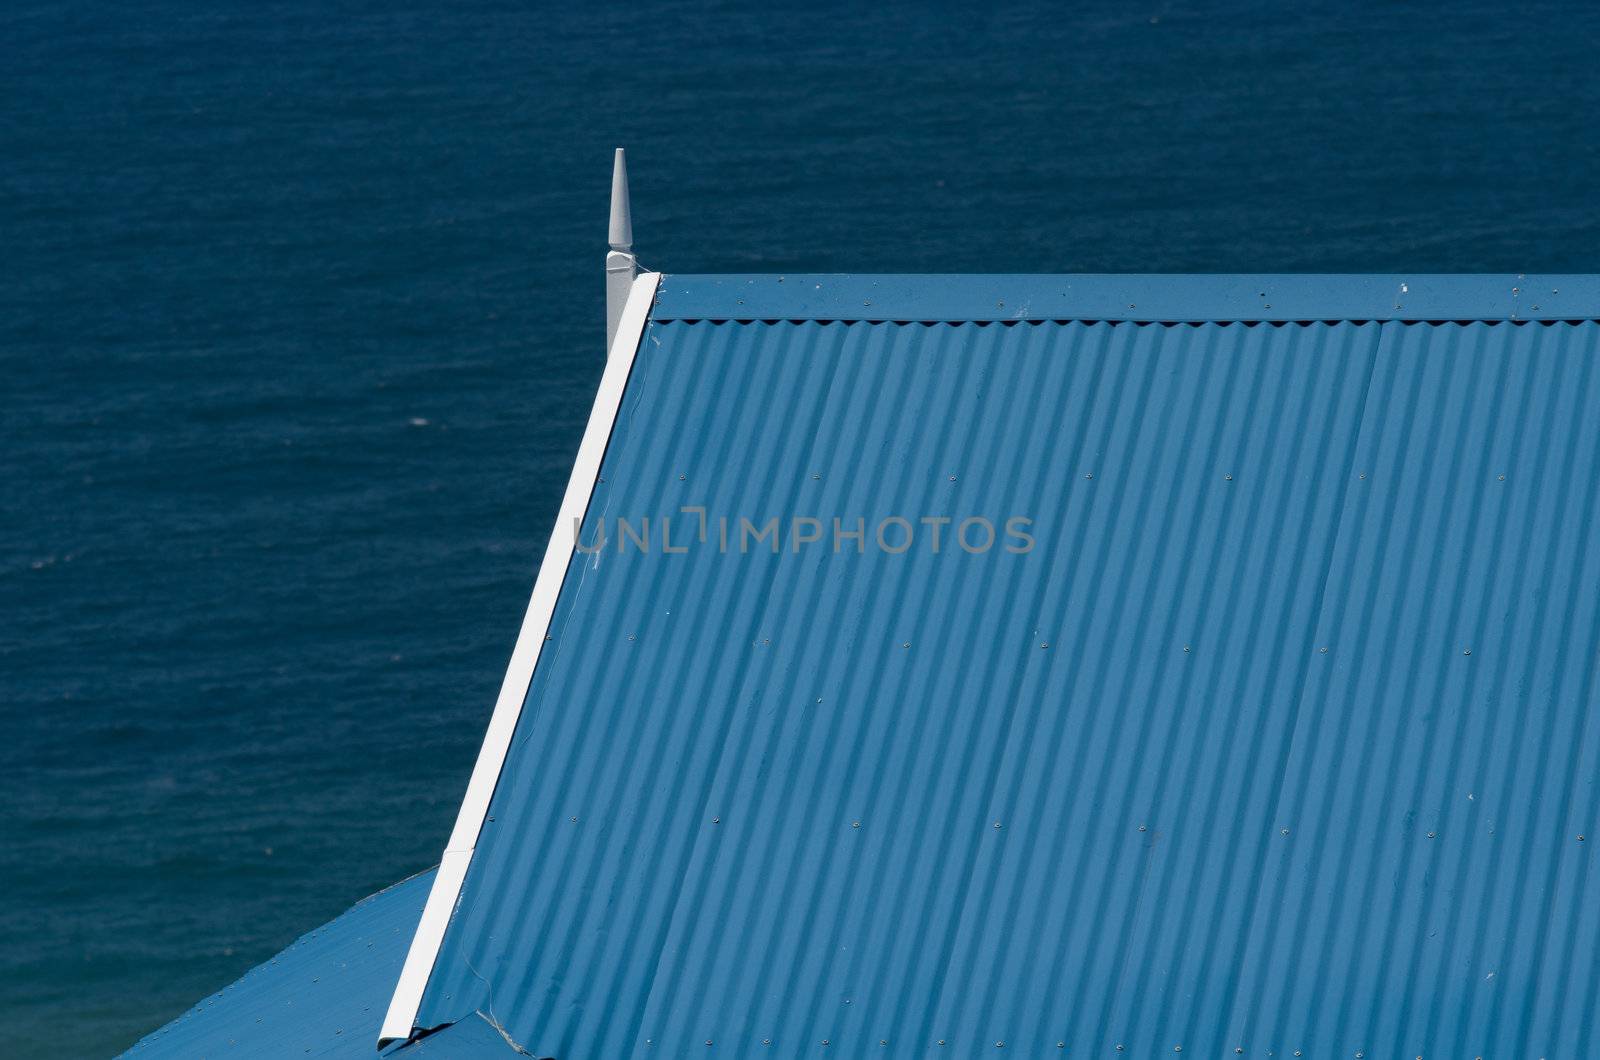 Roof of blue and white Mediteranean style holiday house with sea ocean in background